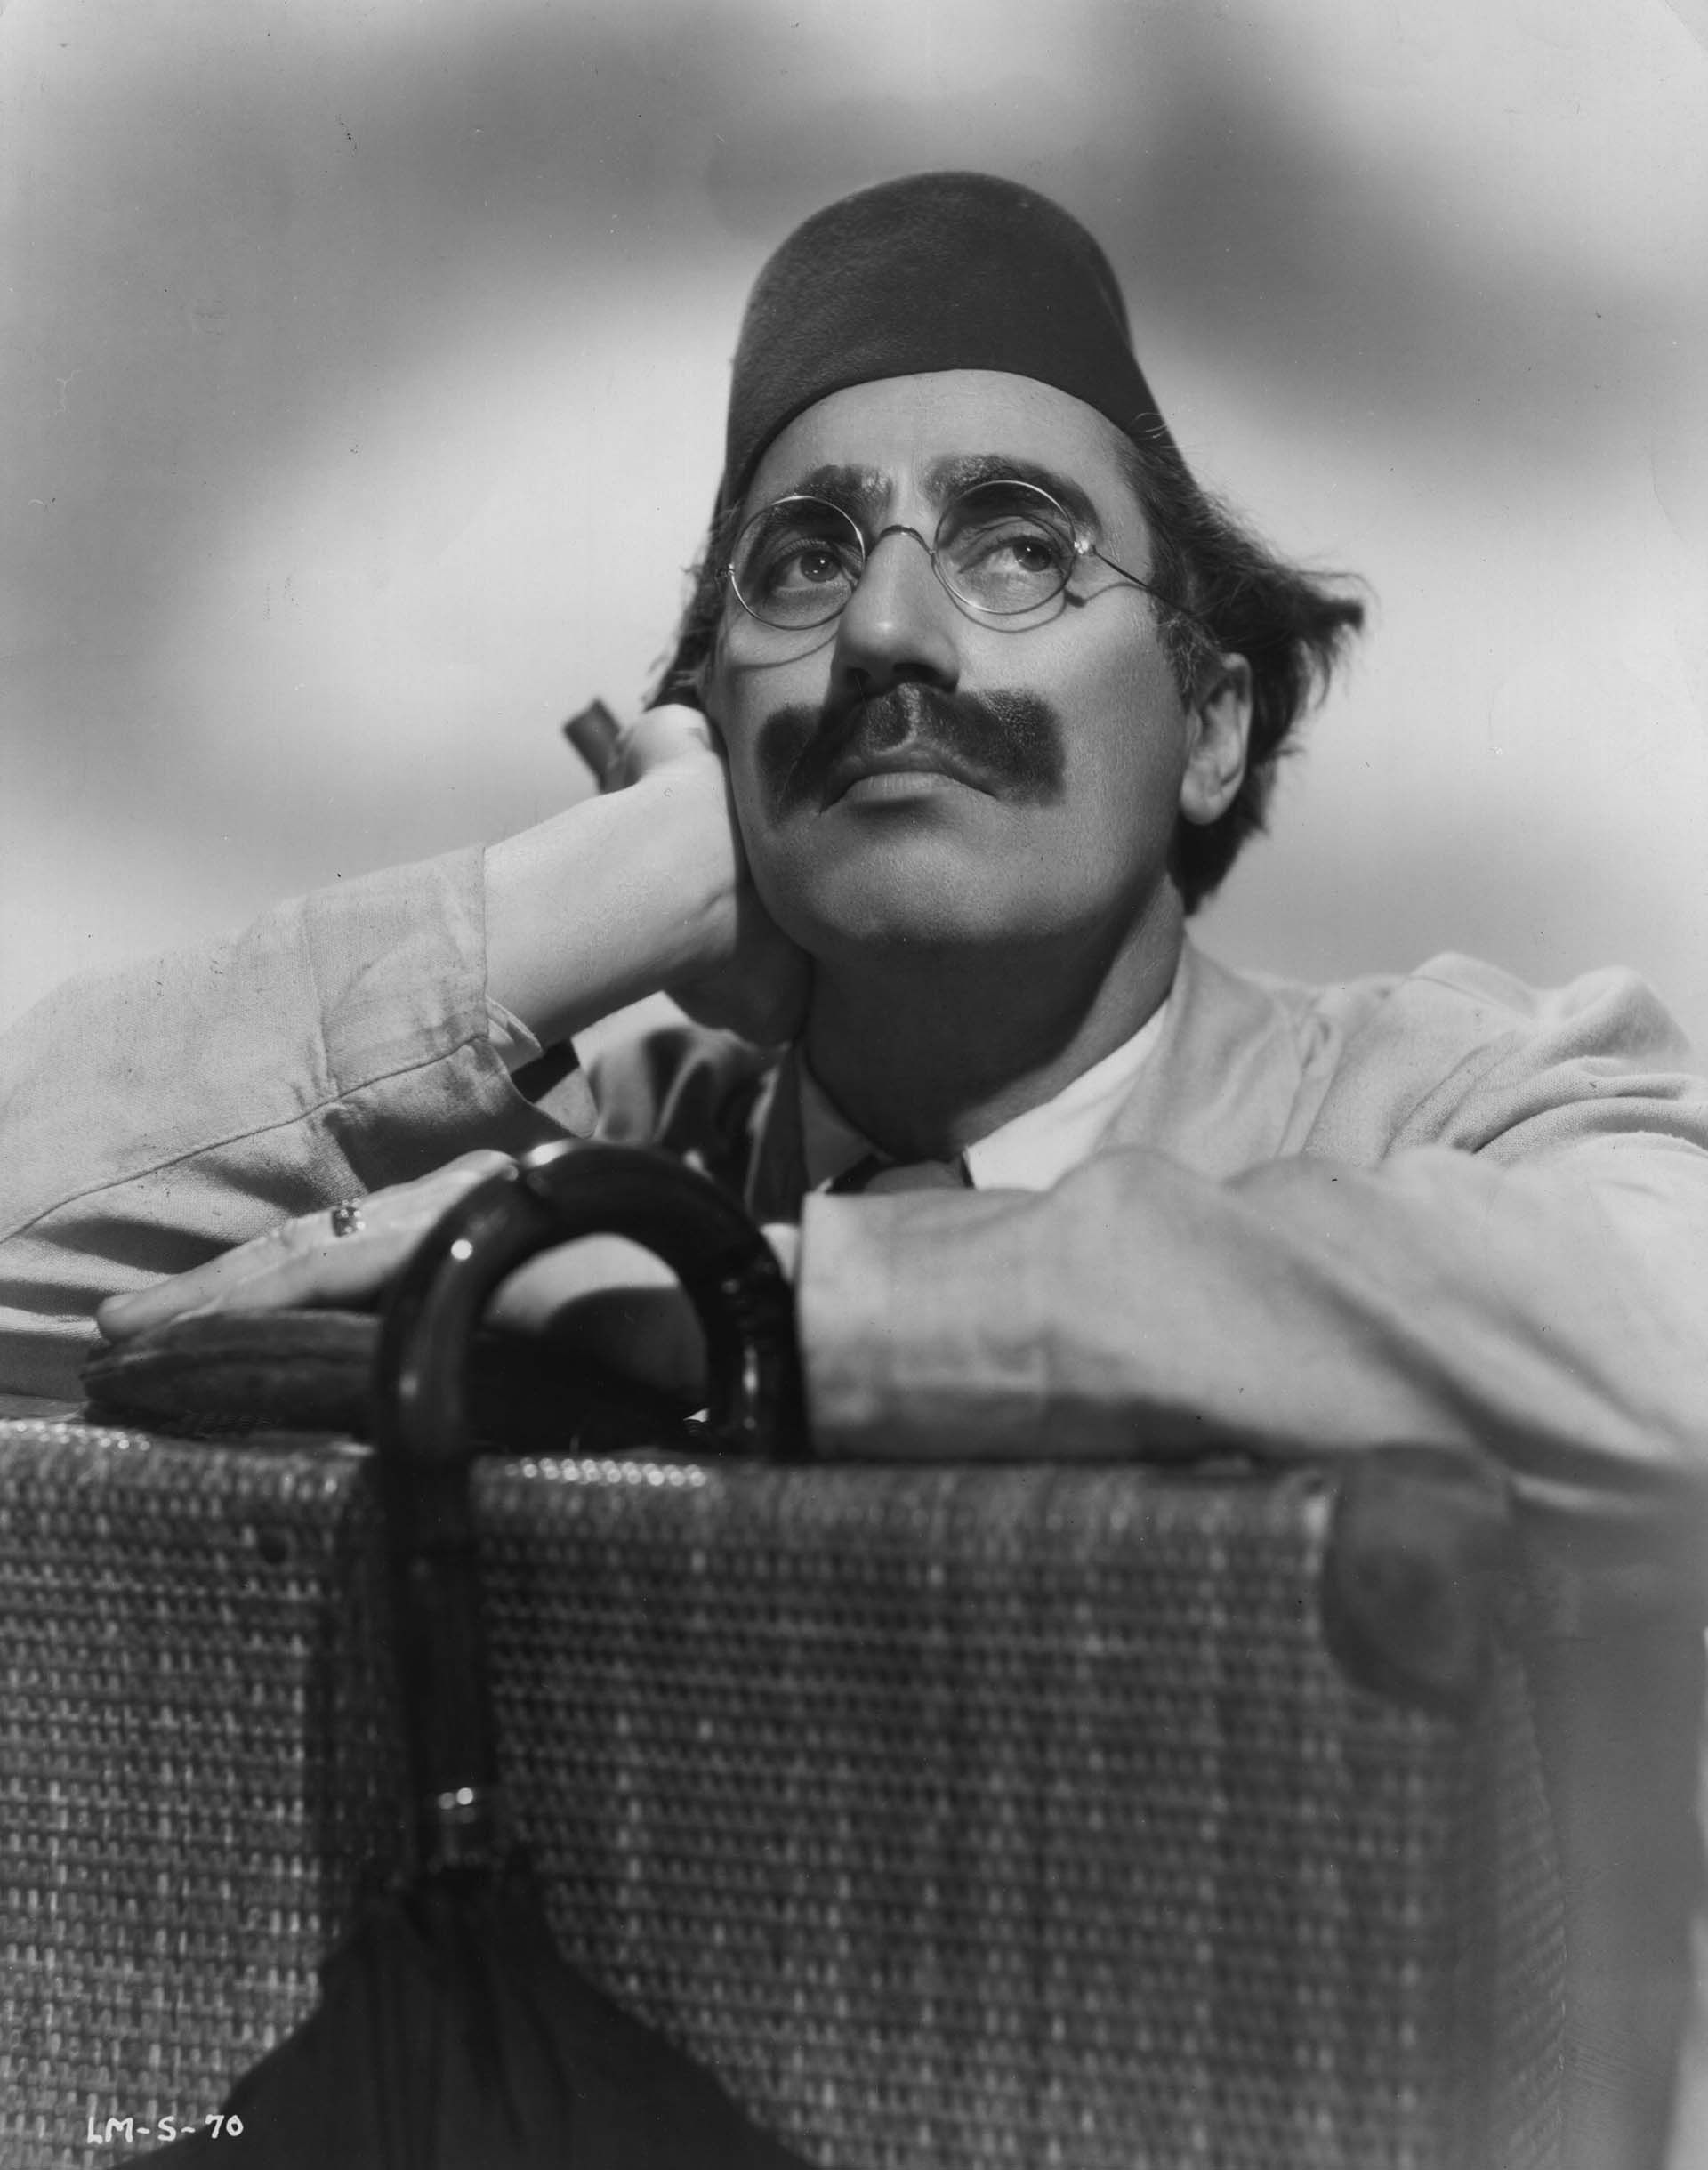   Julius 'Groucho' Marx in 1935, wearing a fez, for his role in "One night in Casablanca" (Photo by Hulton Archive/Getty Images)